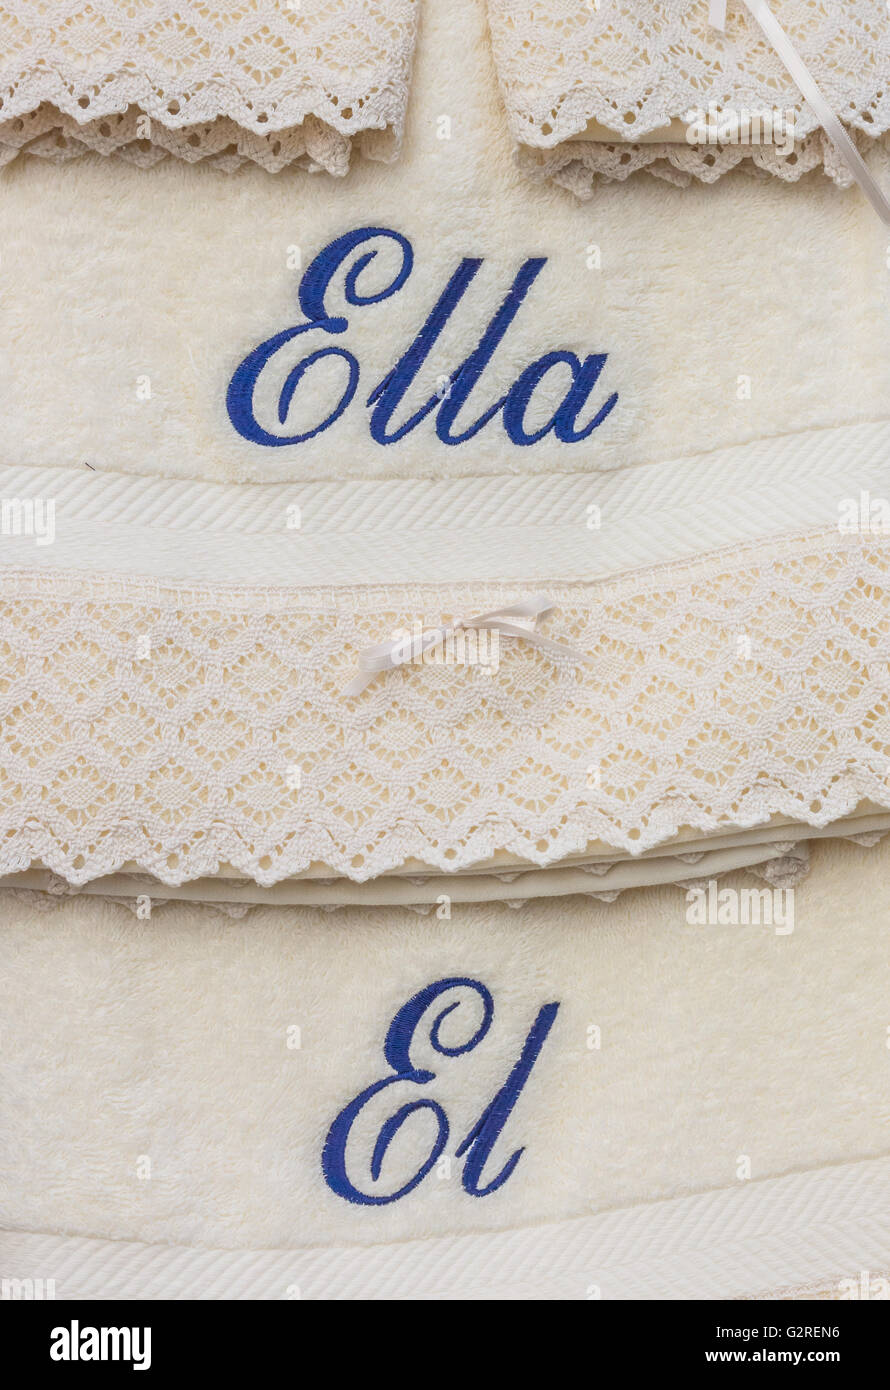 His and hers white towels in Spanish Stock Photo